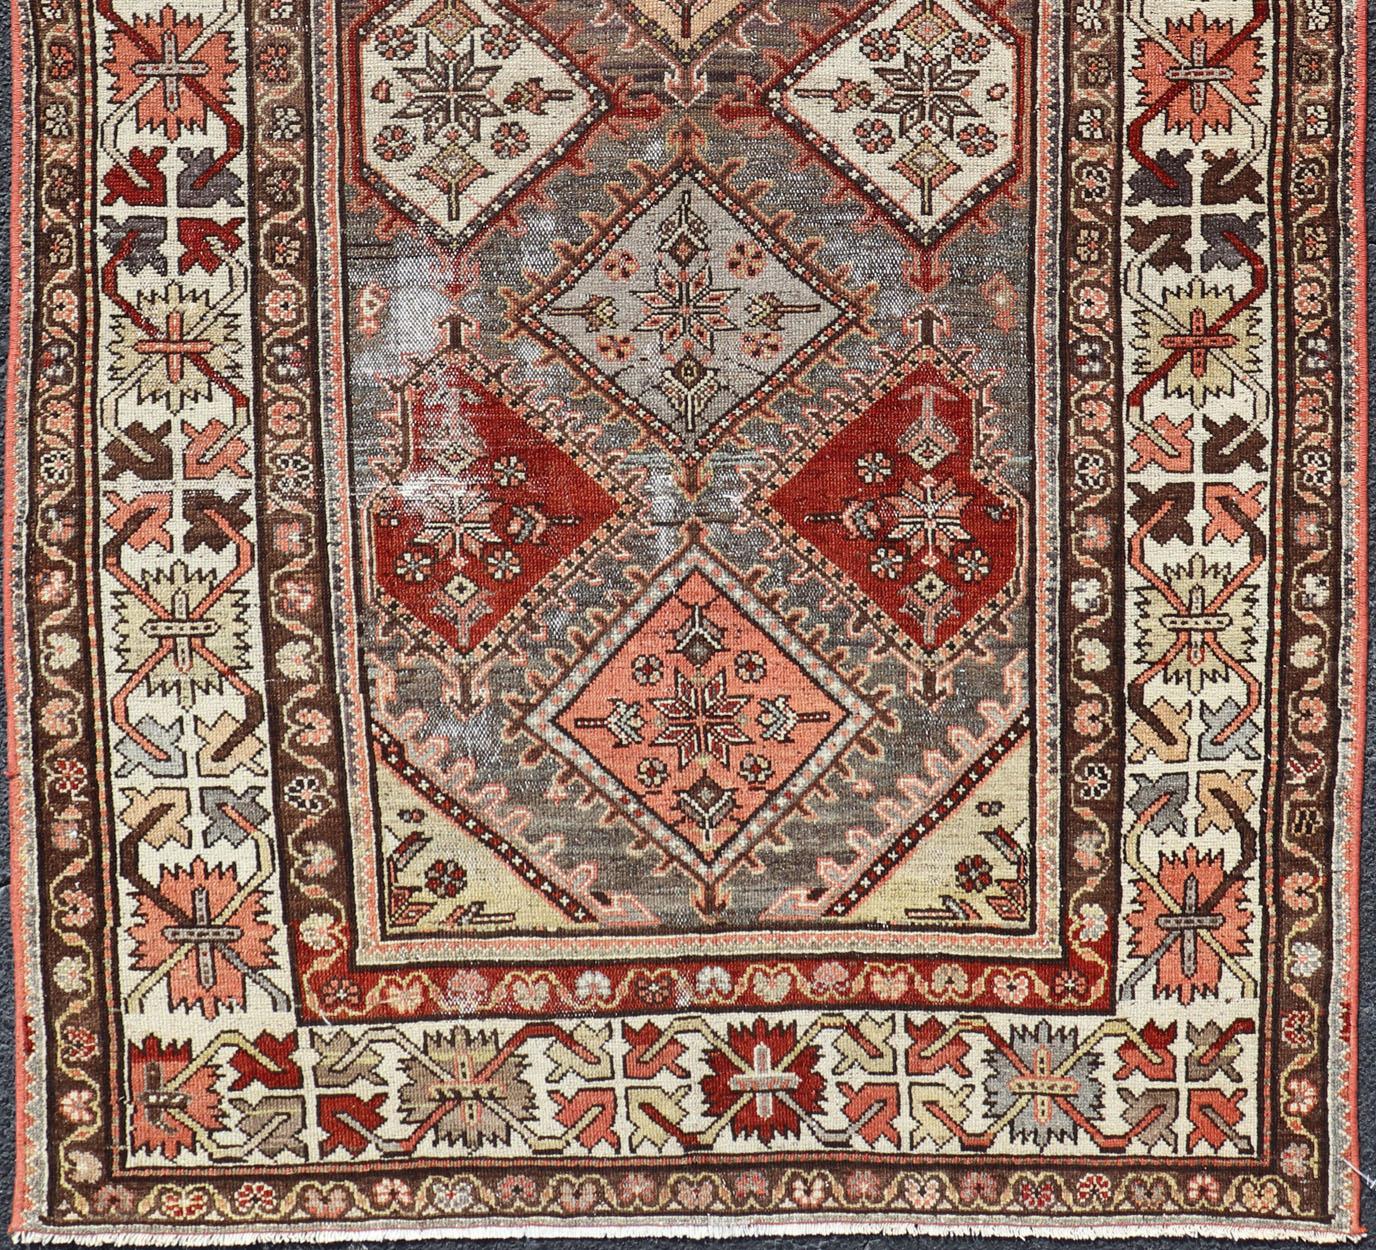 Hand-Knotted Beautiful Antique Persian Bakhitari Rug in Diamond Patten in Gray & Multi Colors For Sale